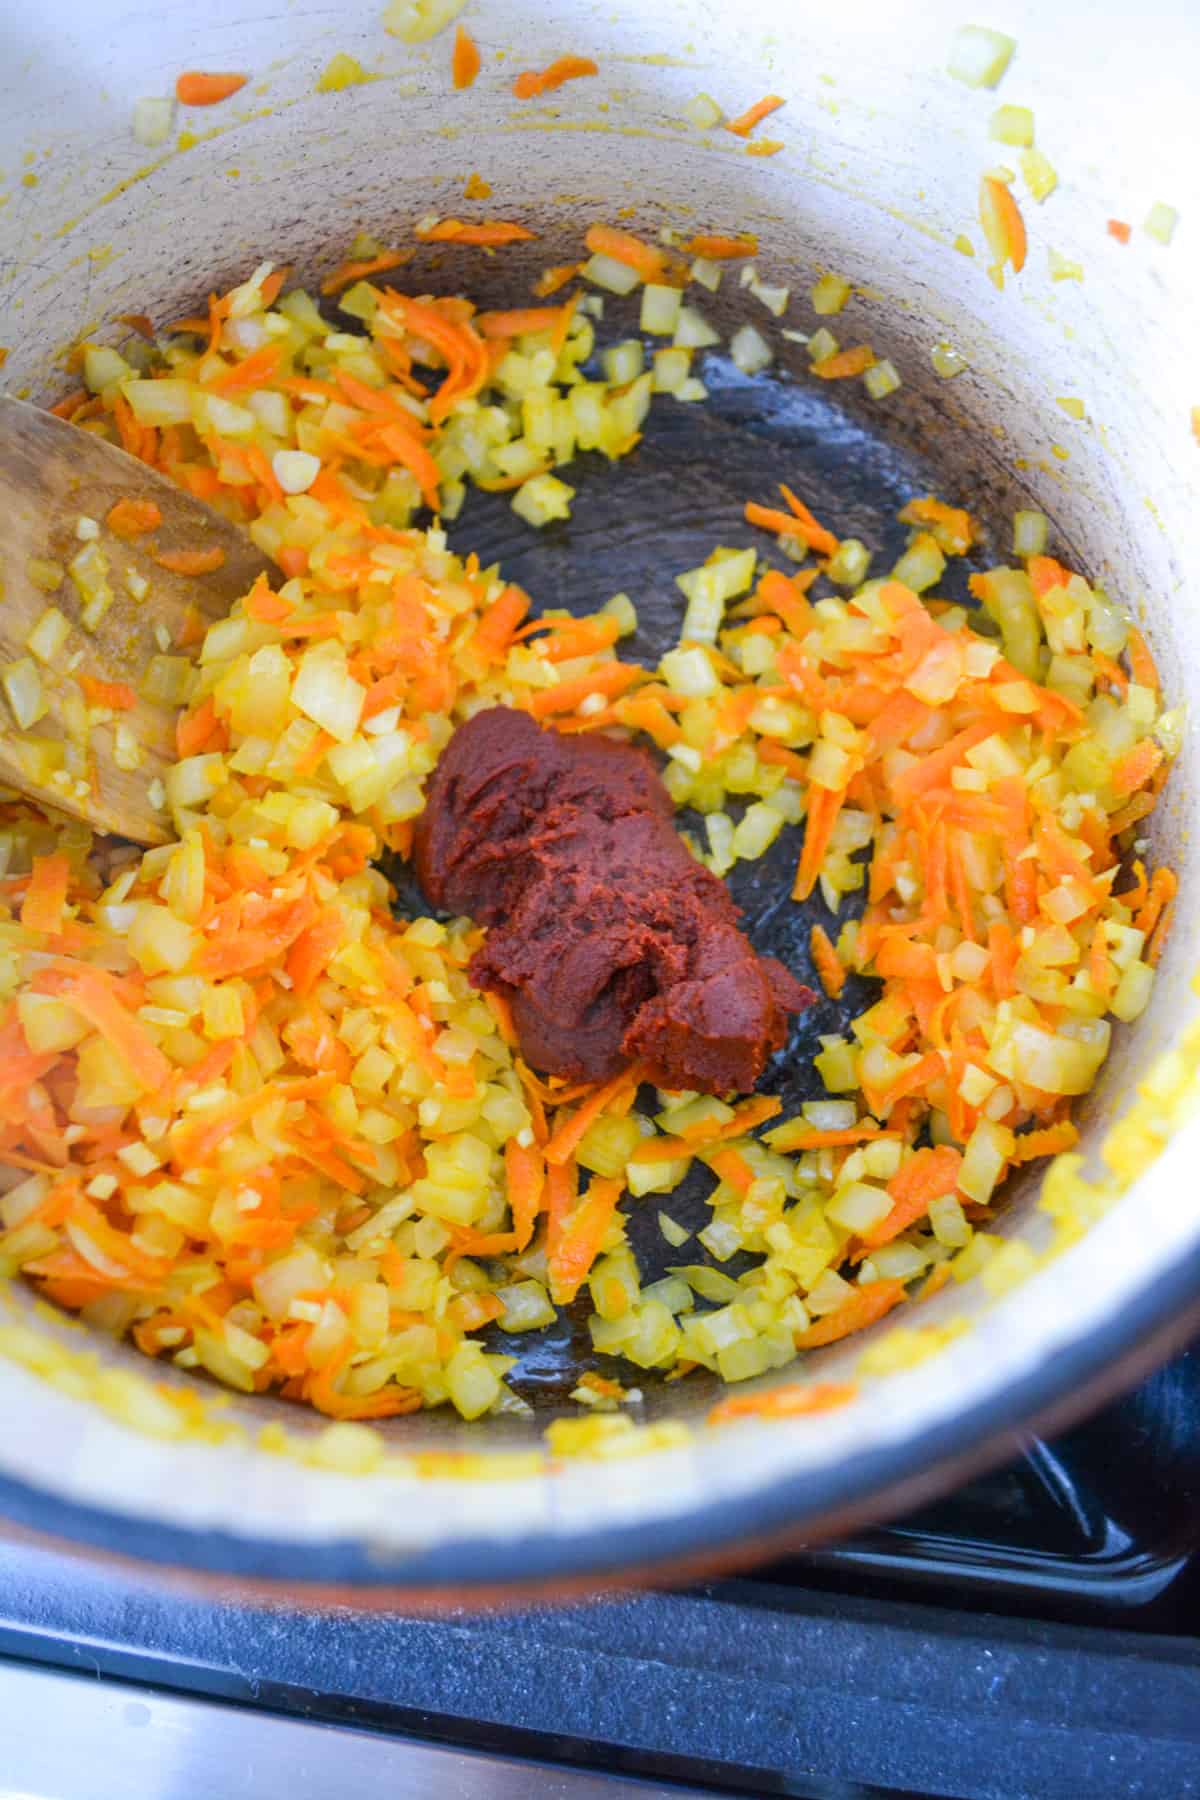 Tomato paste added into the cooking carrots and onion in a pot.